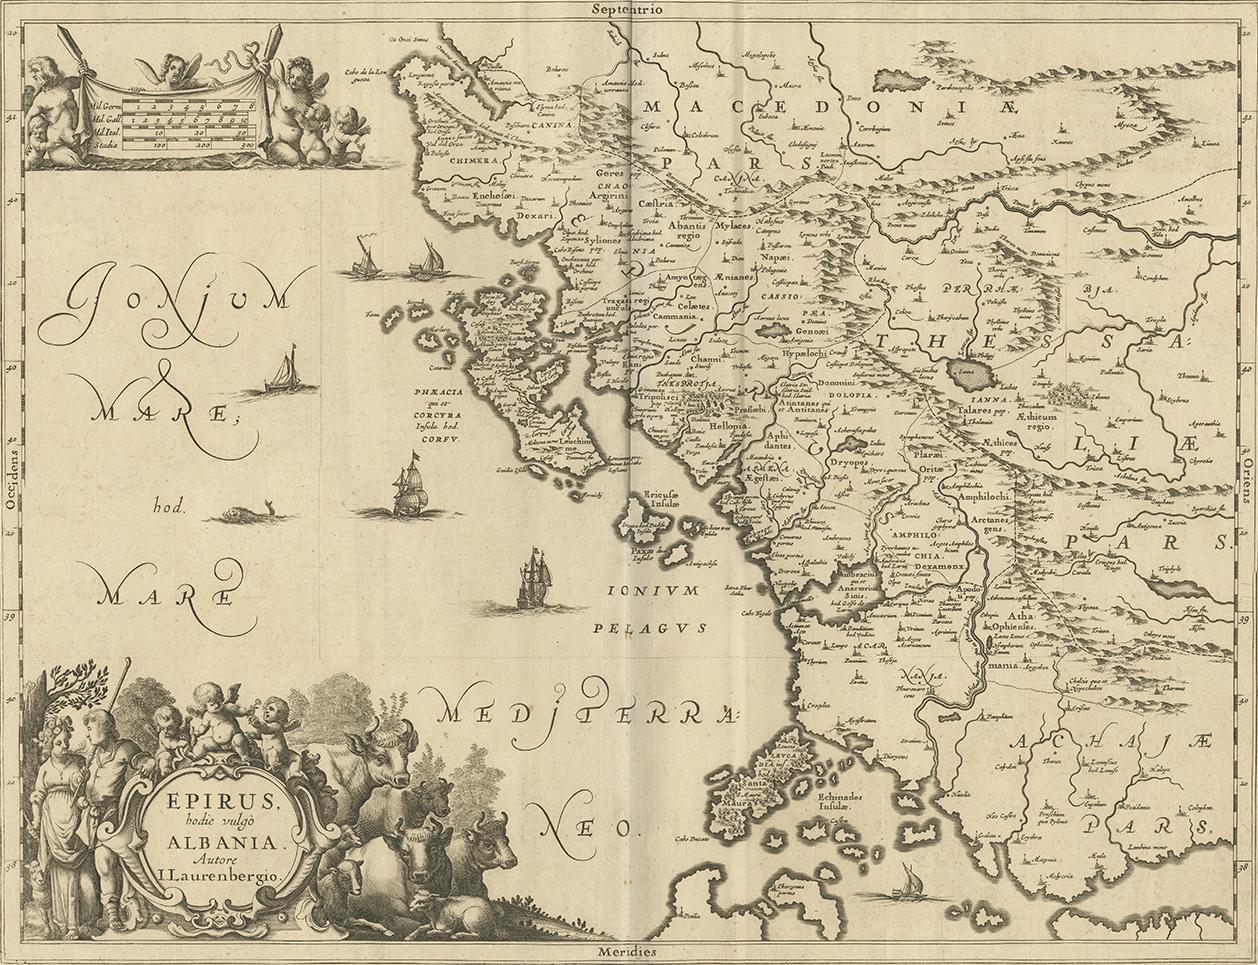 This map covers the northwestern coast of Greece and part of present-day Albania. The map was drawn by Johannes Wilhelm Laurenberg, a mathematician and historian who produced several atlases of Greece and worked with both Blaeu and Hondius/Jansson.